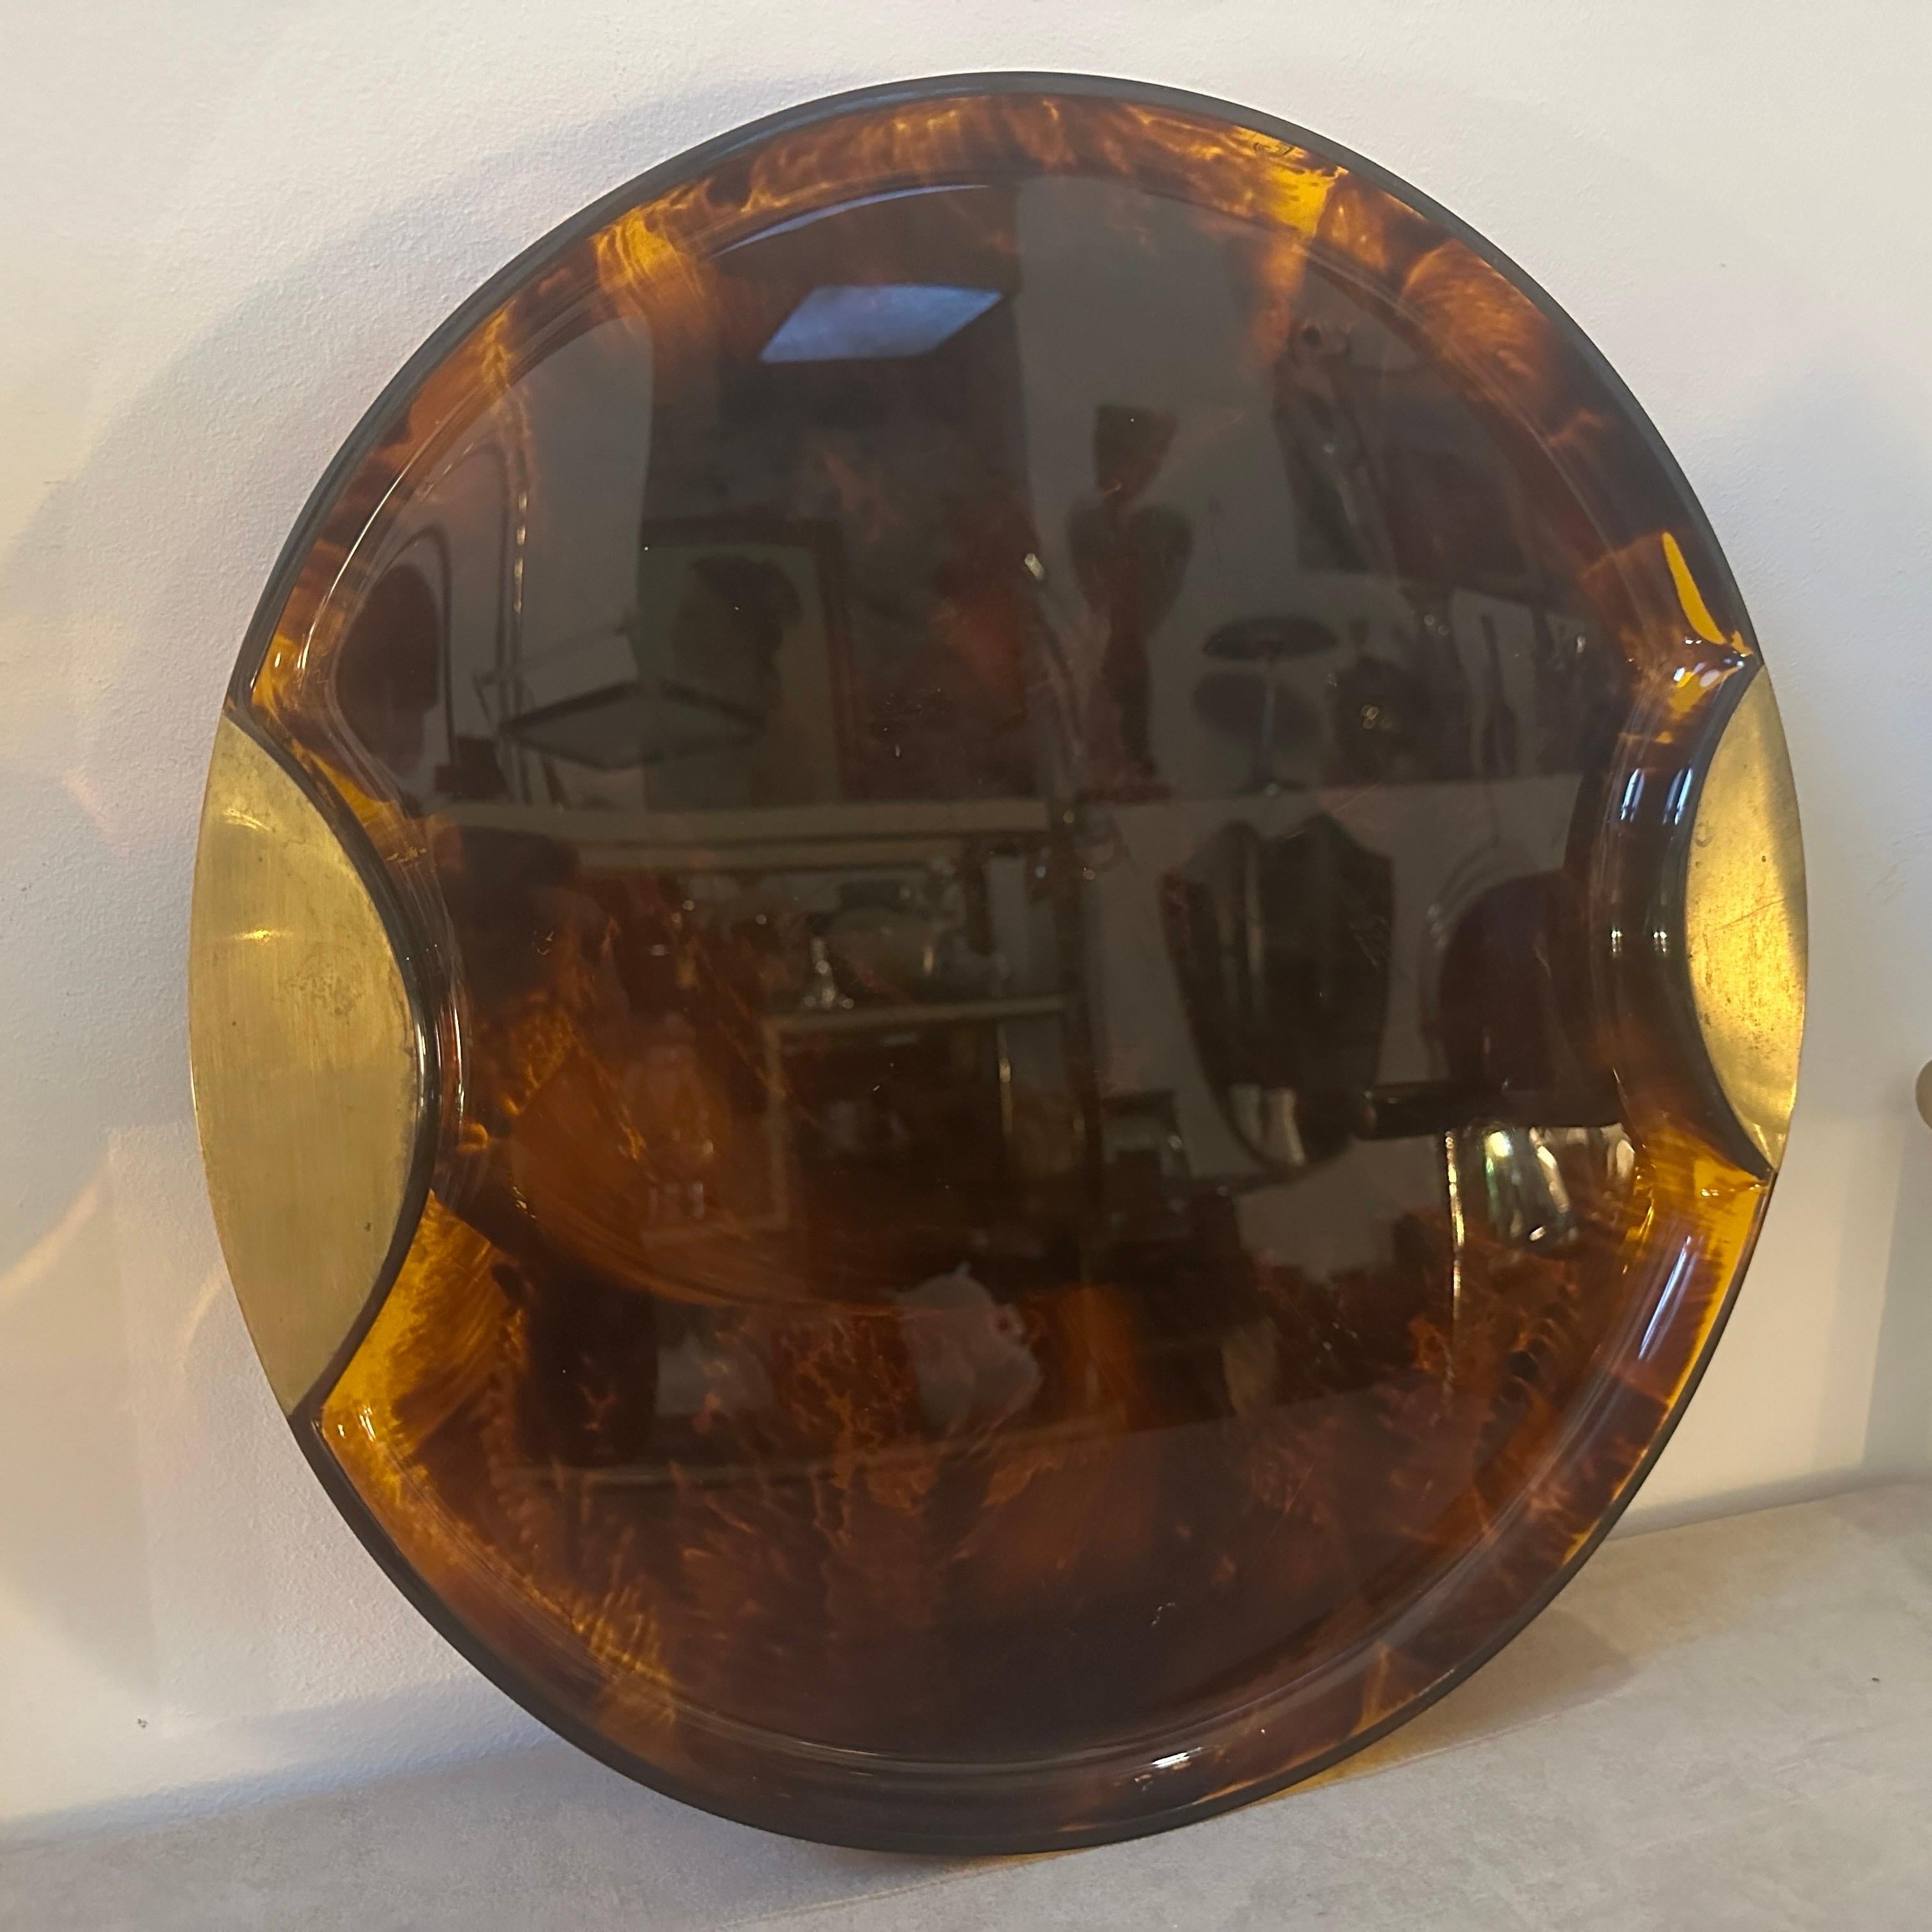 A Modernist Fake Tortoise Lucite and Brass round tray designed and manufactured by the Italian design company Guzzini during the 1970s in lovely conditions. The Guzzini company is a well-known Italian brand that specializes in the production of